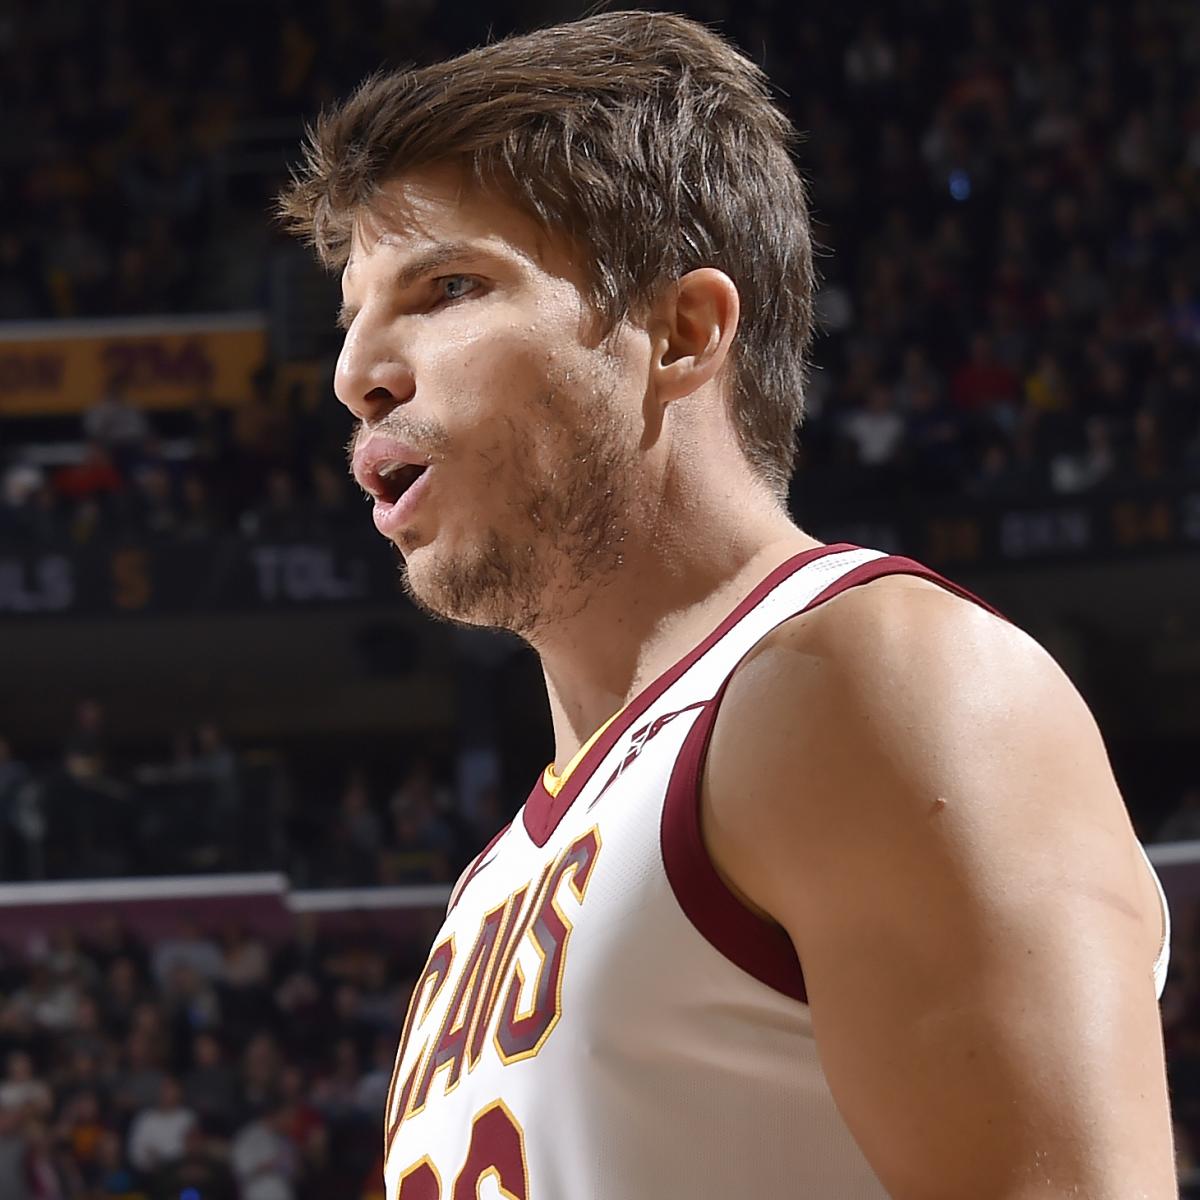 Kyle Korver out for Cavs, now down 5 rotational players